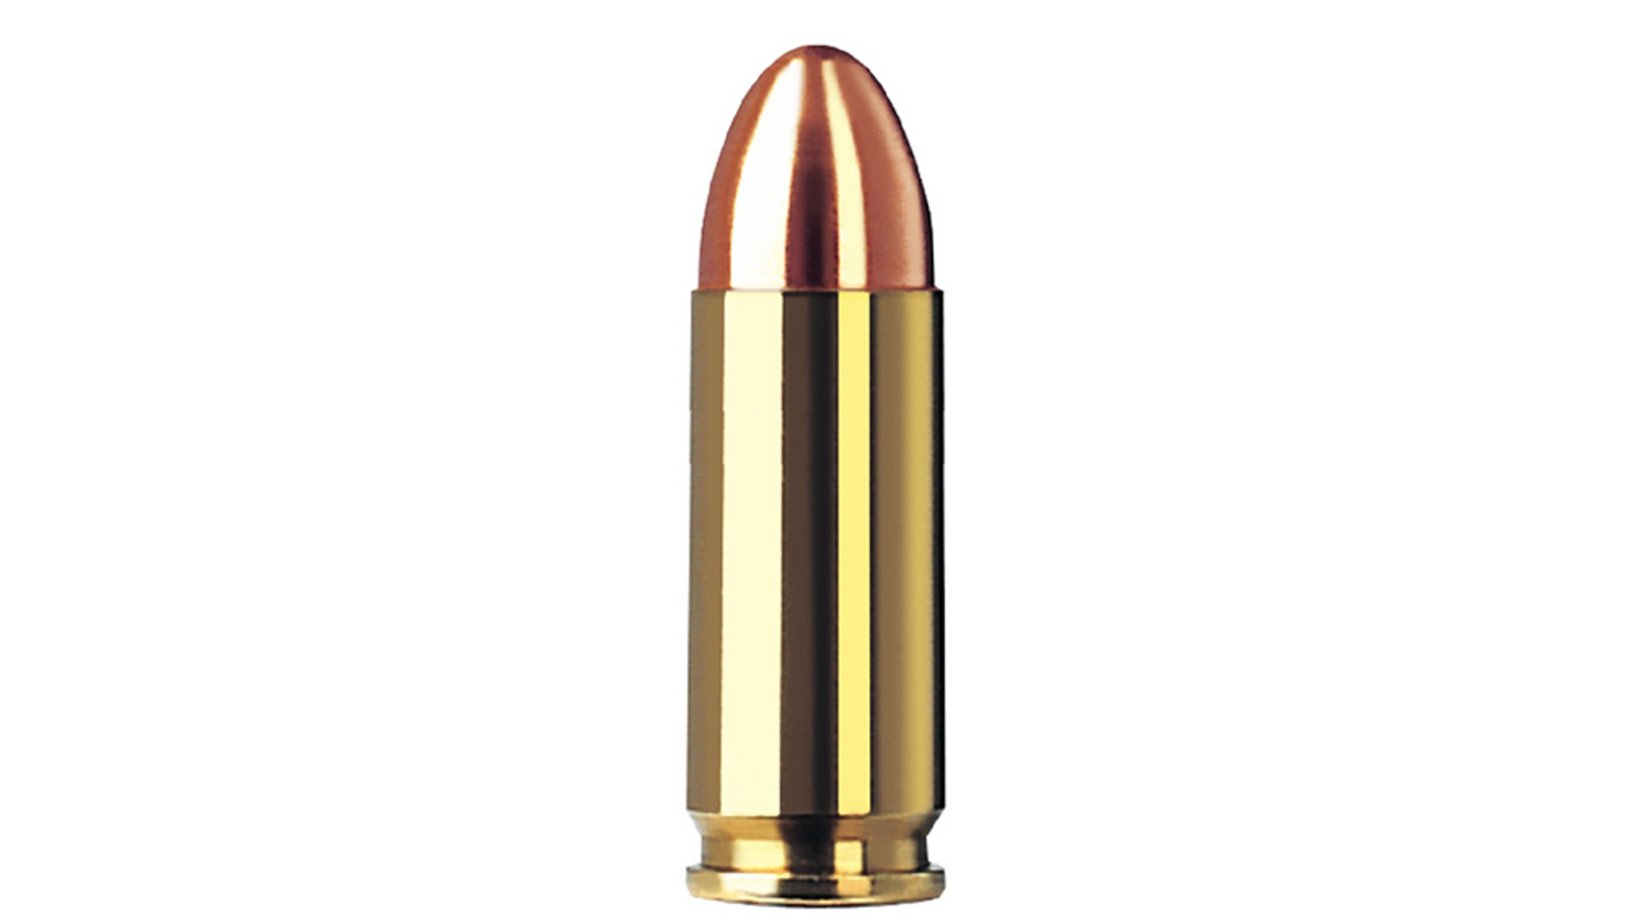 Single bullet view of GECO .38 Super AUTO Full Metal Jacket 8,0g